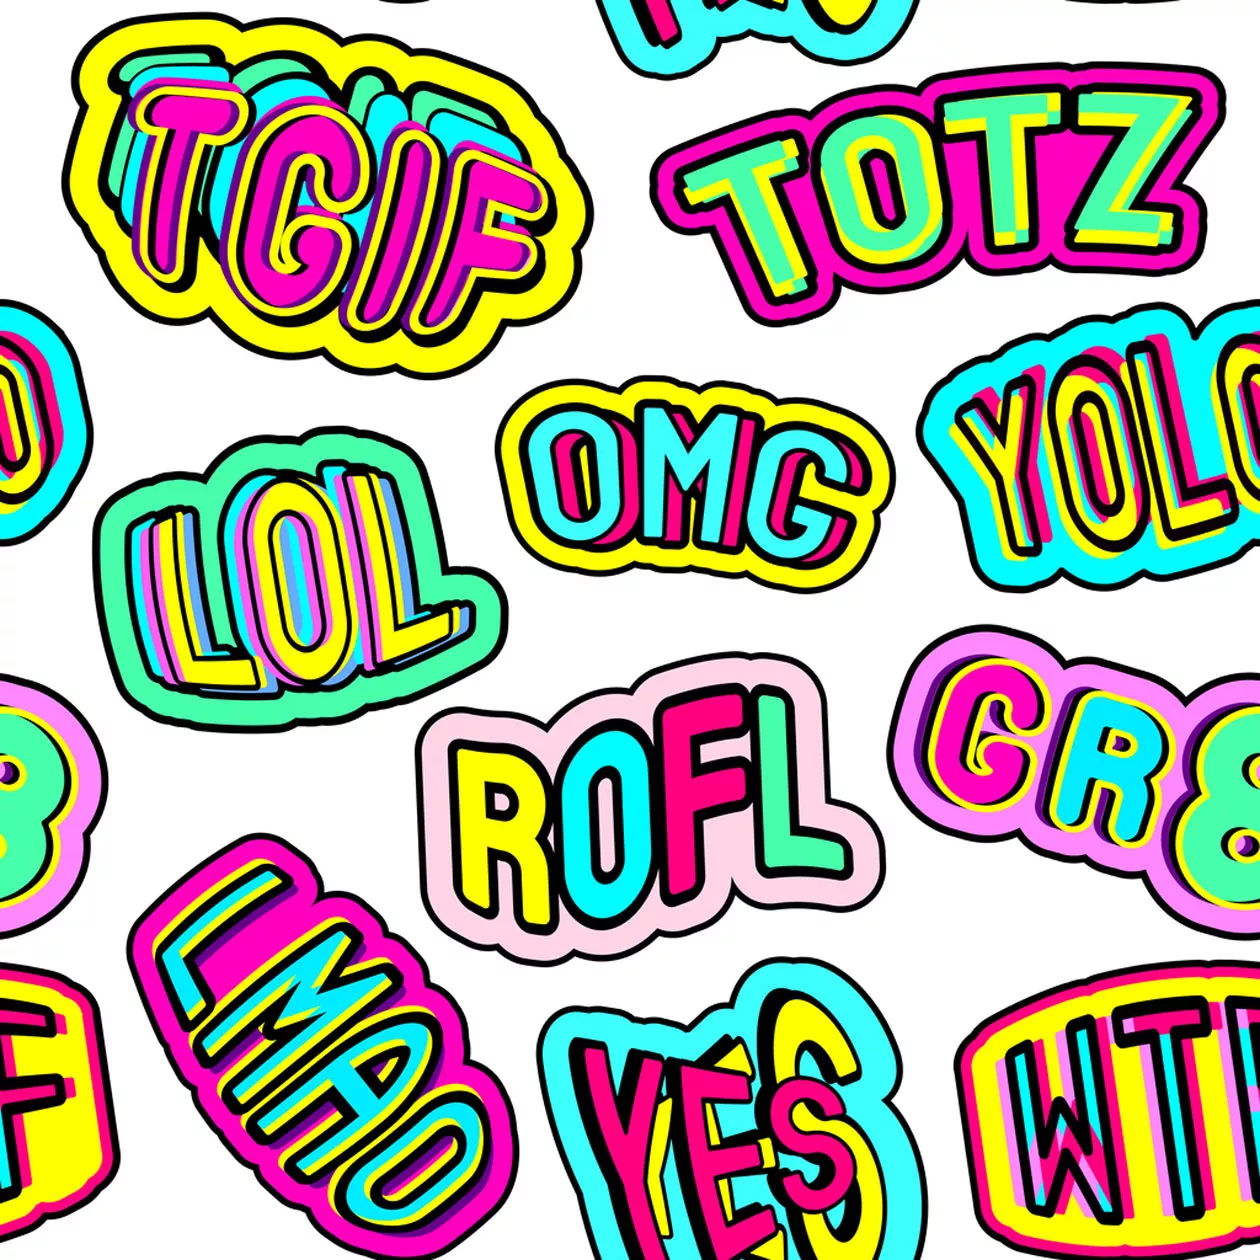  ROLF = Rolling On the Floor Laughing. TOTZ = Totally.